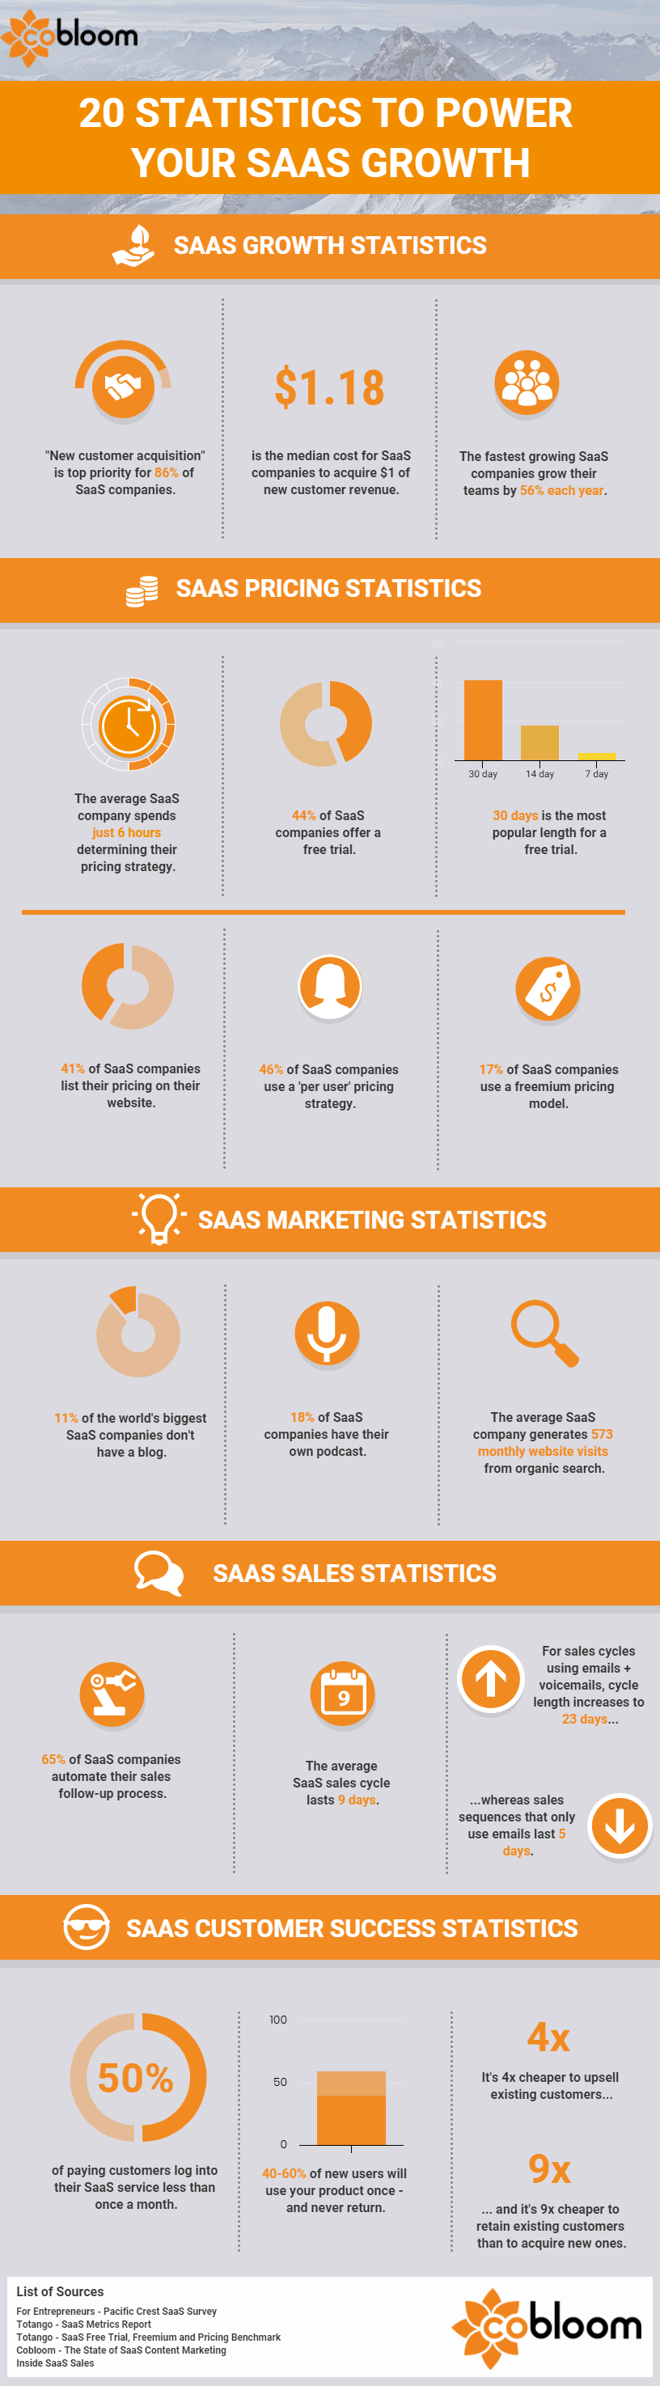 20 Statistics to Power Your SaaS Growth.png